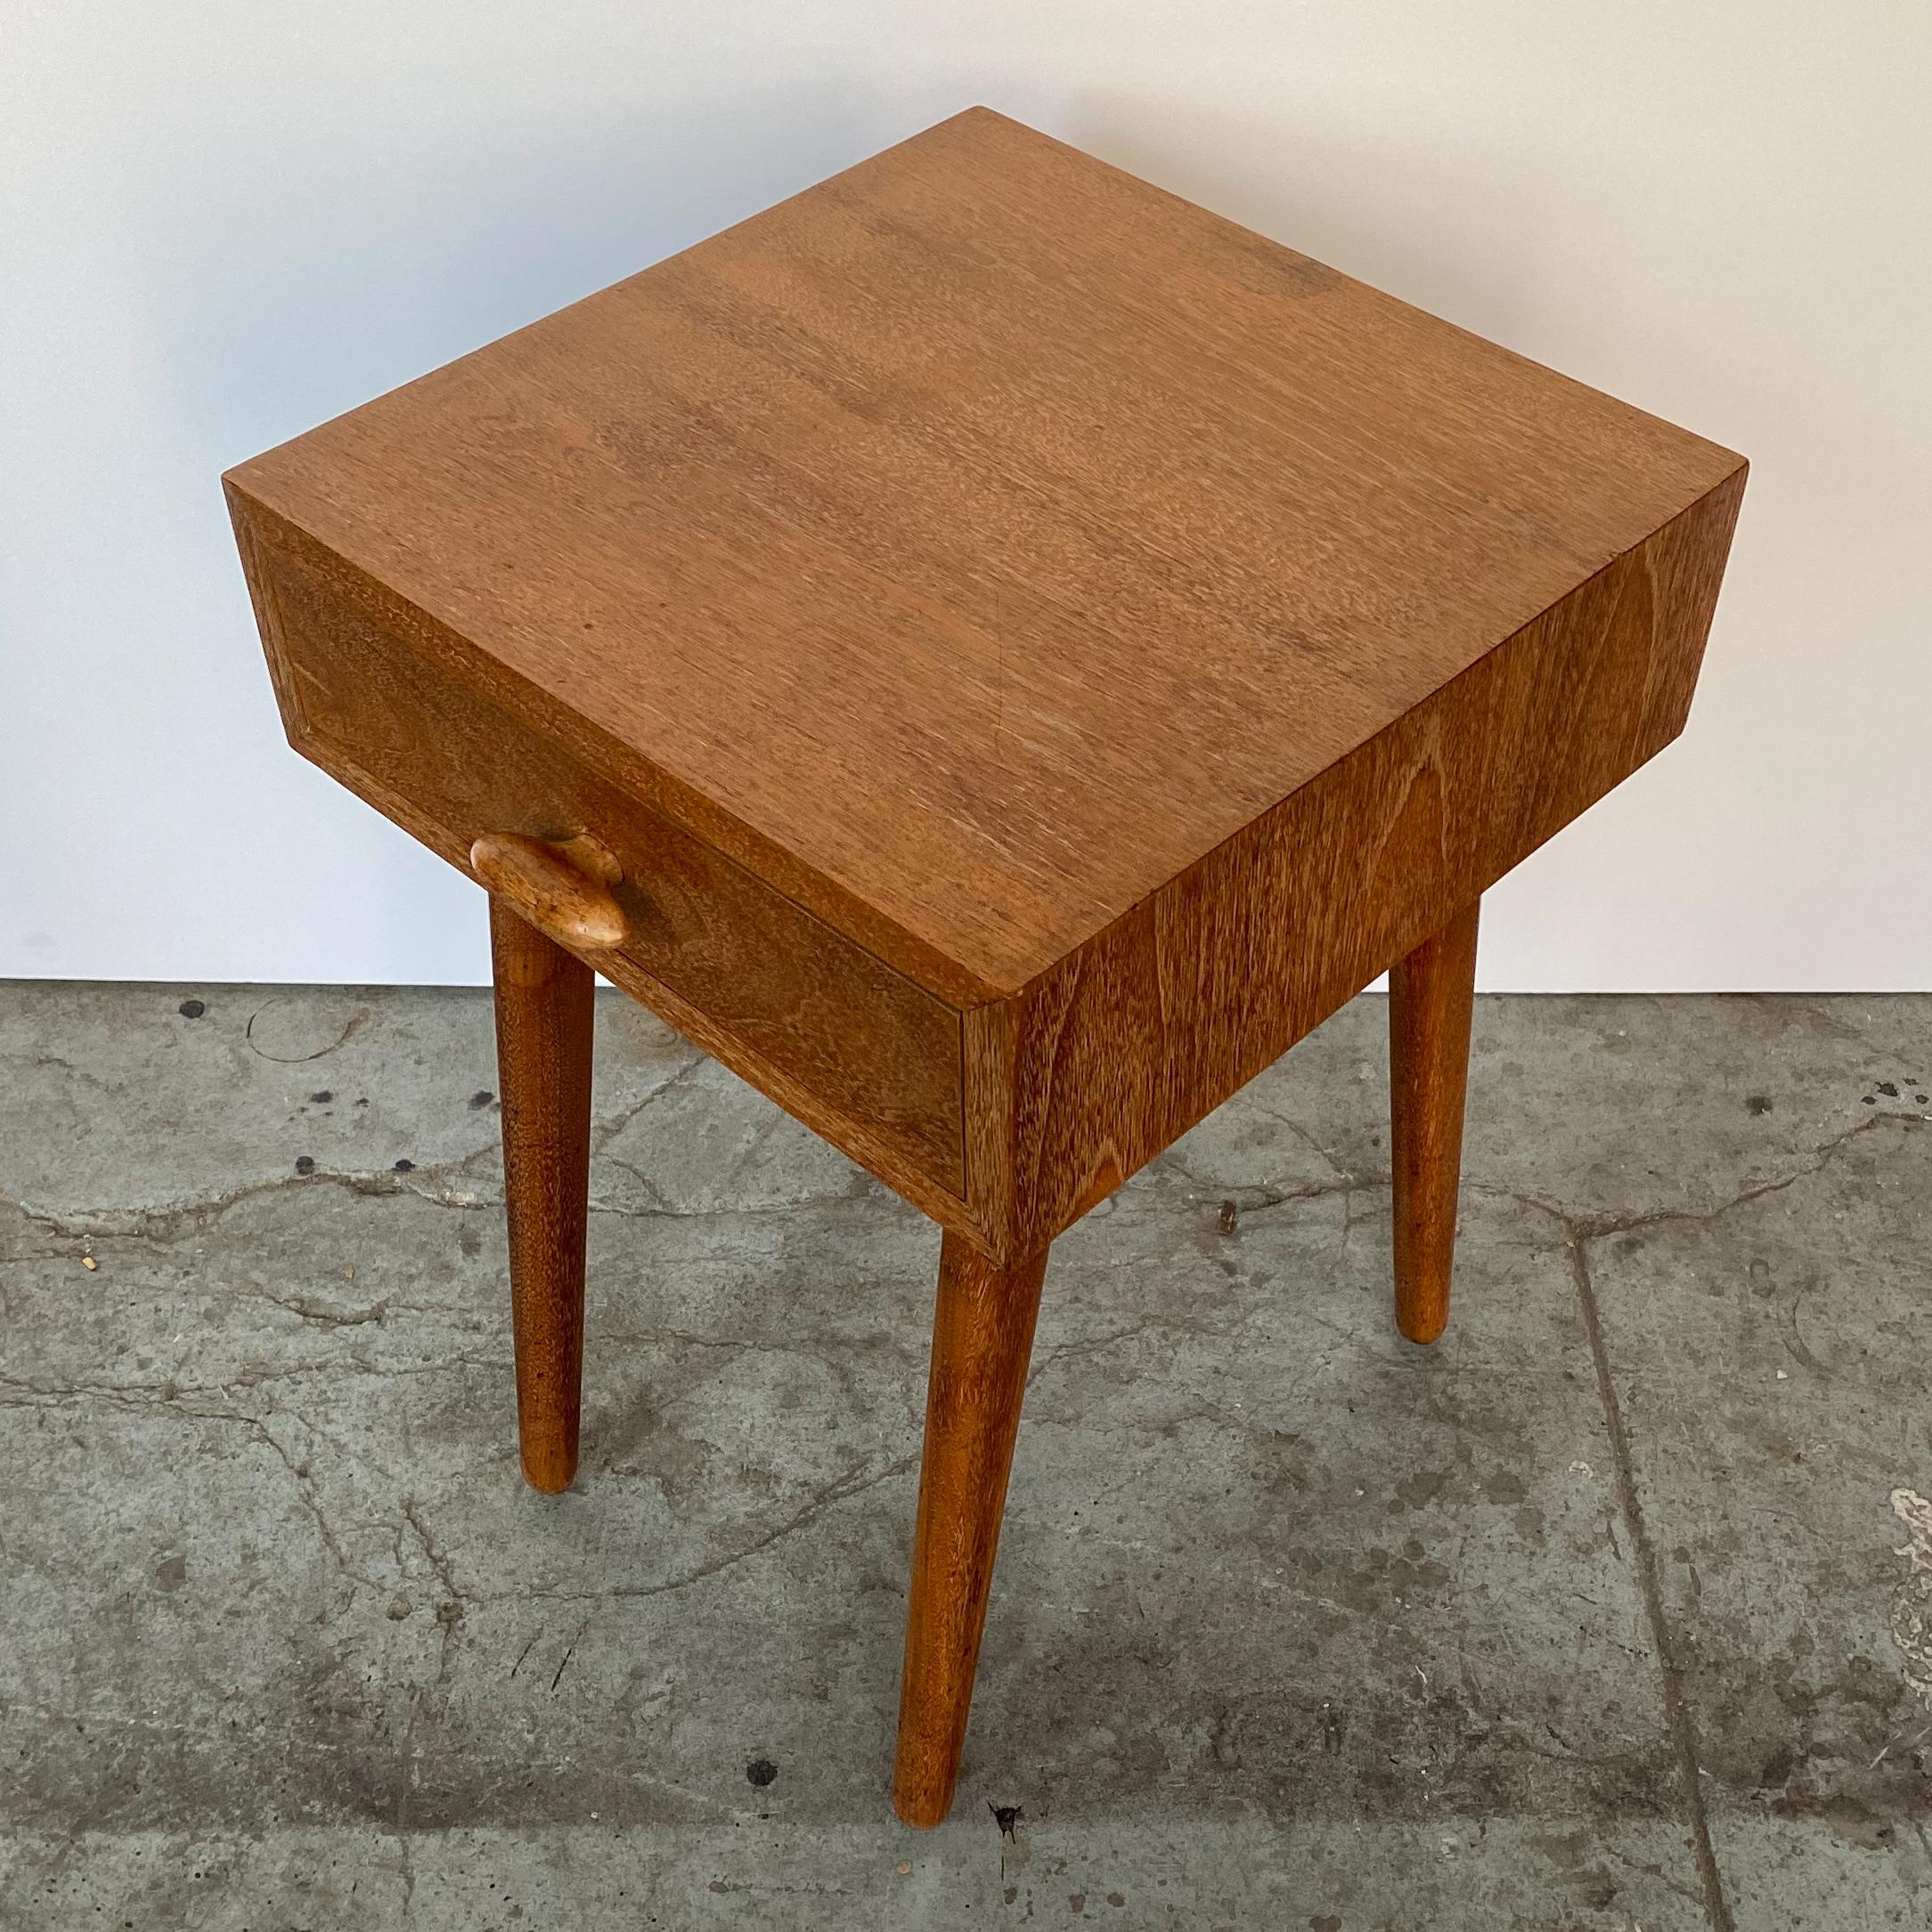 Nightstand in silvered walnut by the team of German-born American architects Oscar Stonorov and Willo von Moltke, designed for the Museum of Modern Art's 1941 Organic Design in Home Furnishings competition, and produced in very small numbers by Red